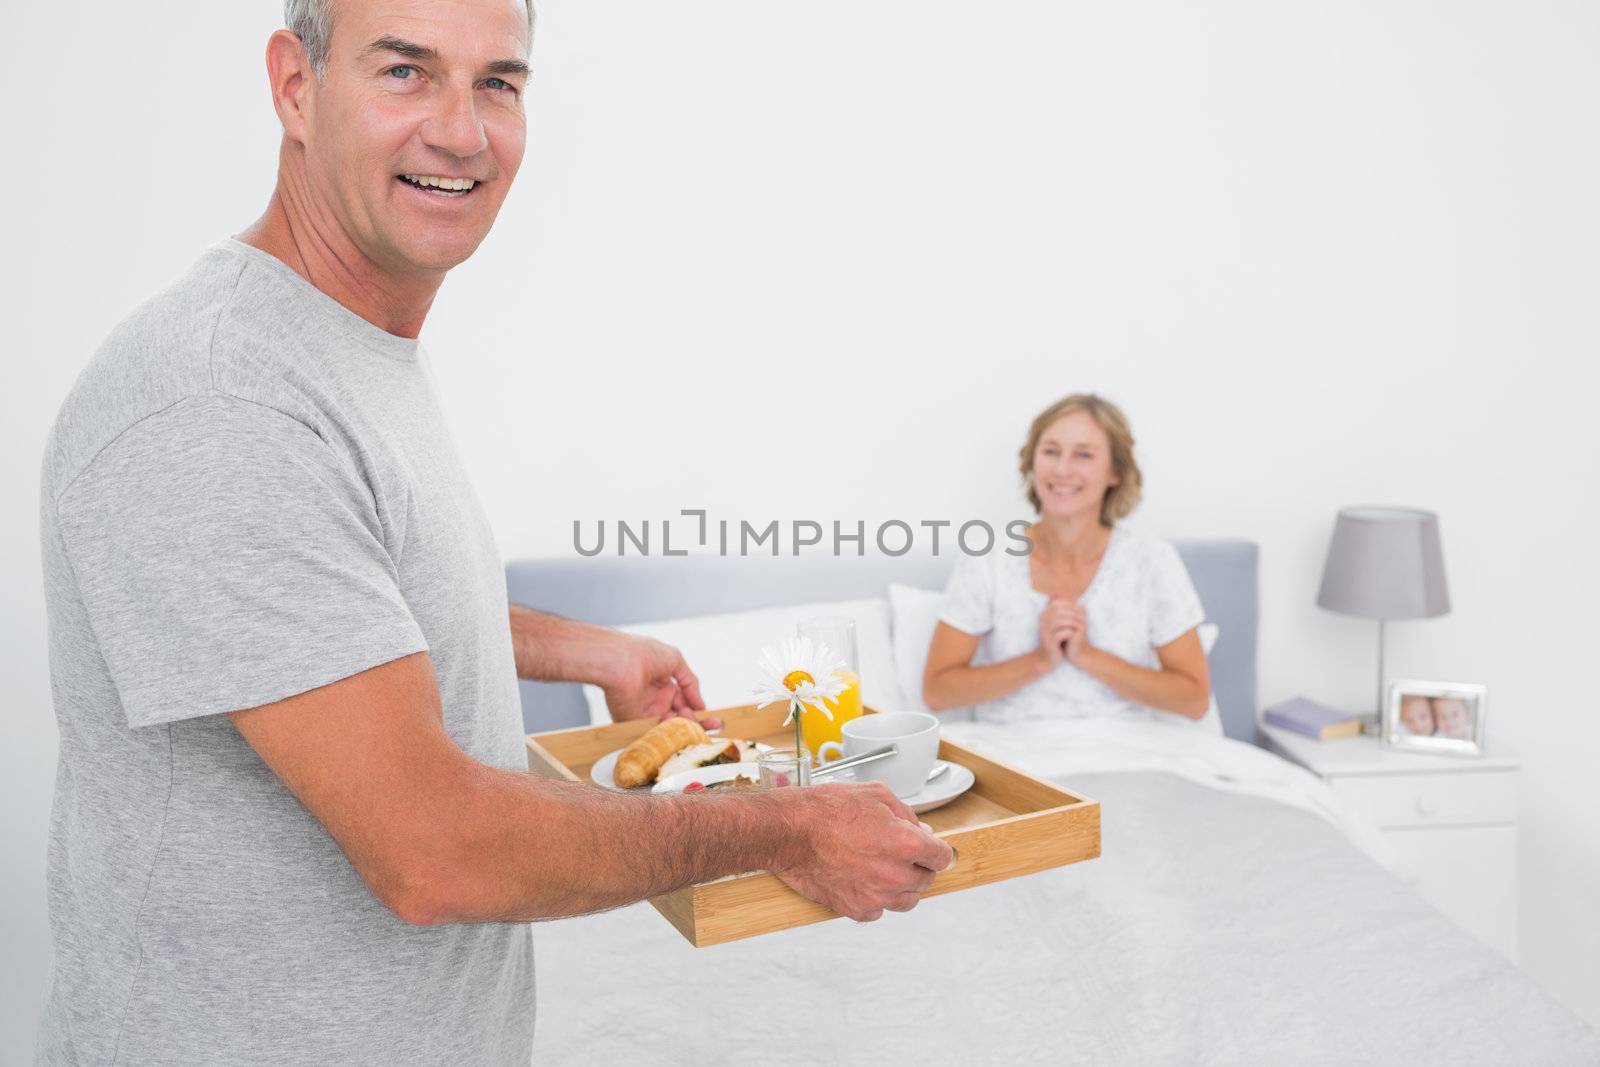 Happy husband bringing breakfast in bed to delighted wife looking at camera in bedroom at home